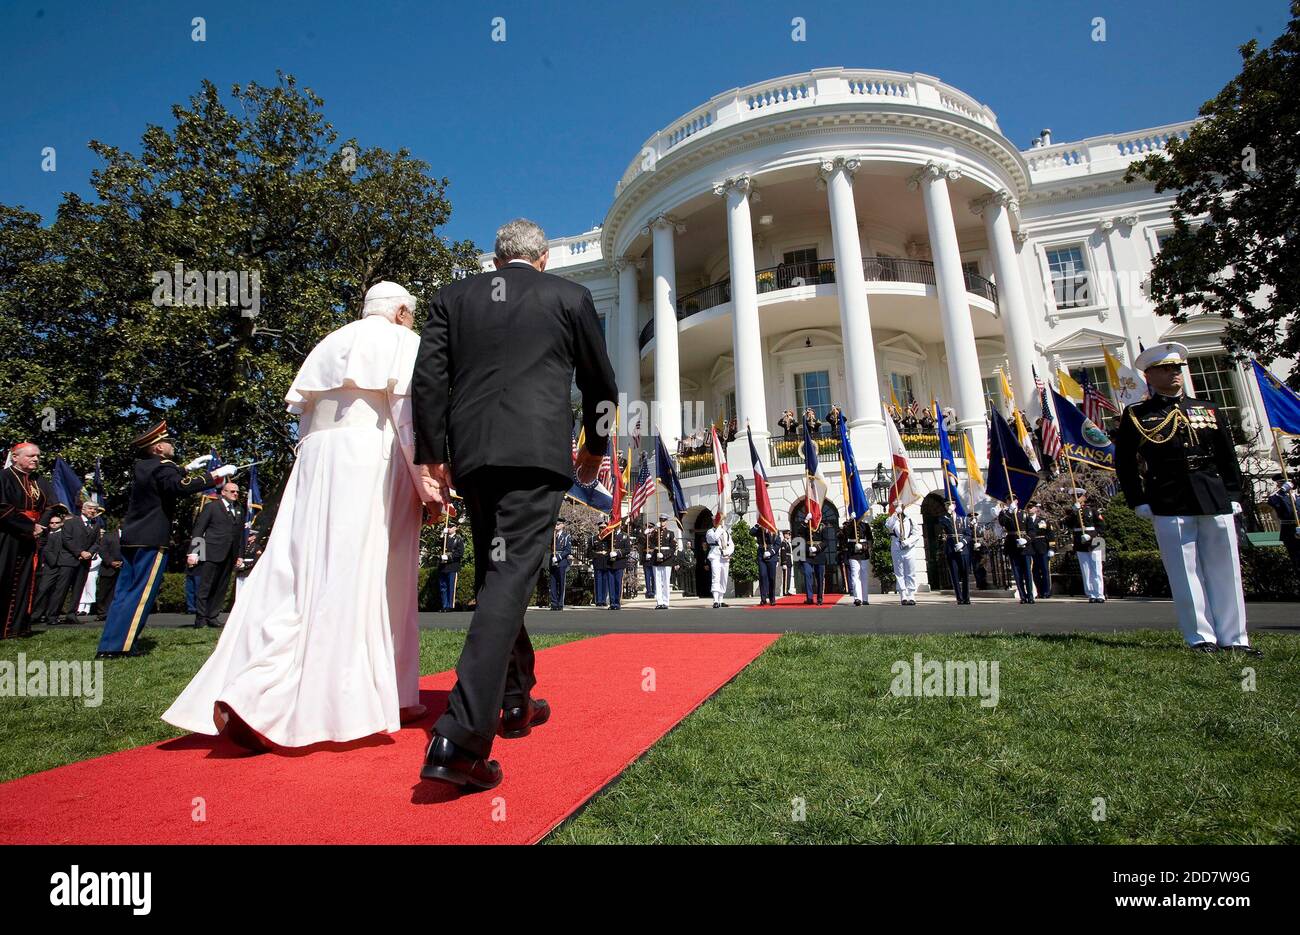 NO FILM, NO VIDEO, NO TV, NO DOCUMENTARY - Pope Benedict XVI and U.S. President George W. Bush walk to the White House following an arrival ceremony on the South Lawn in Washington, DC, on April 16, 2008. Photo by Chuck Kennedy/MCT/ABACAPRESS.COM Stock Photo